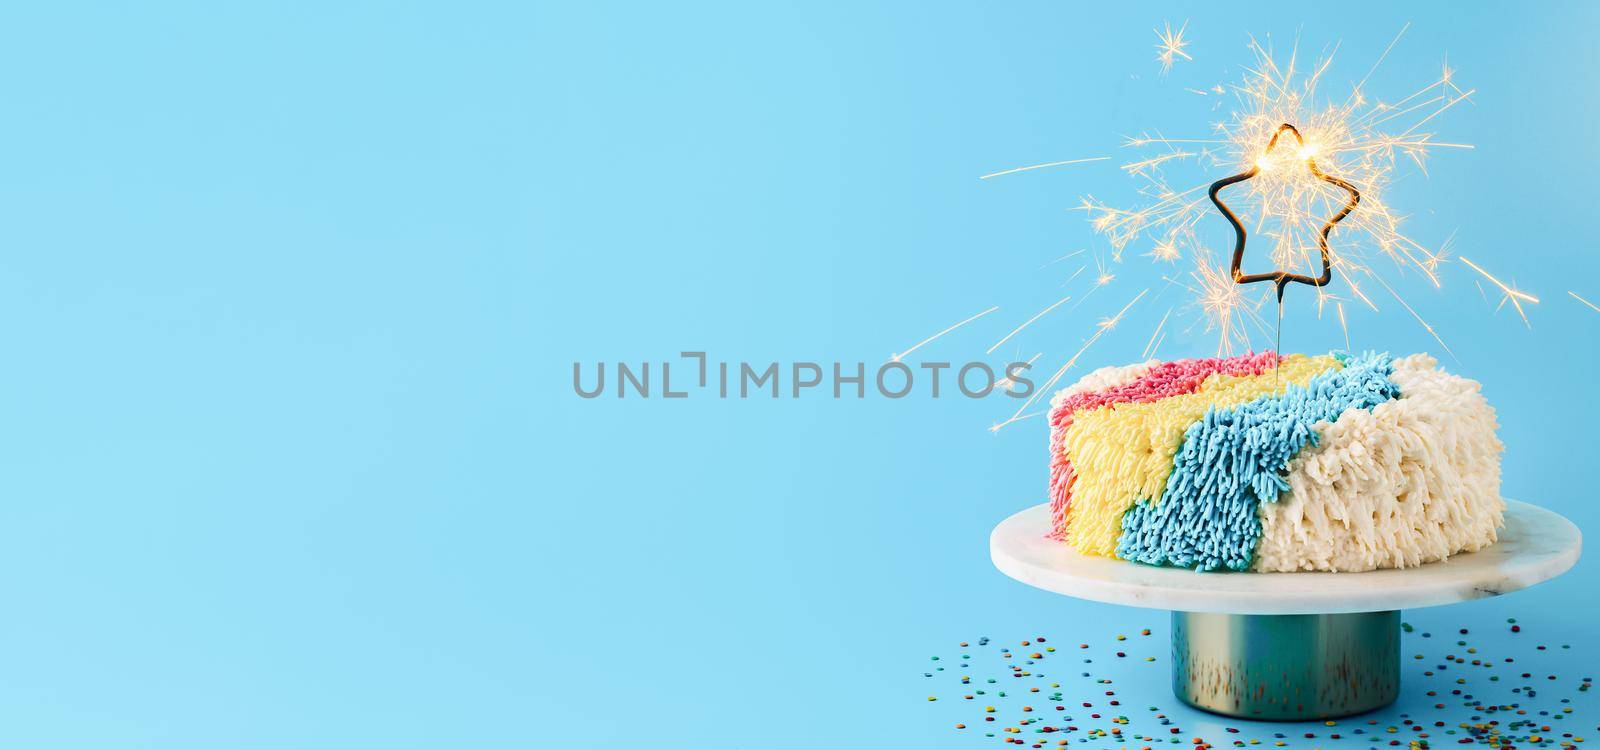 Shag cake with sparkler on blue, copy space by fascinadora